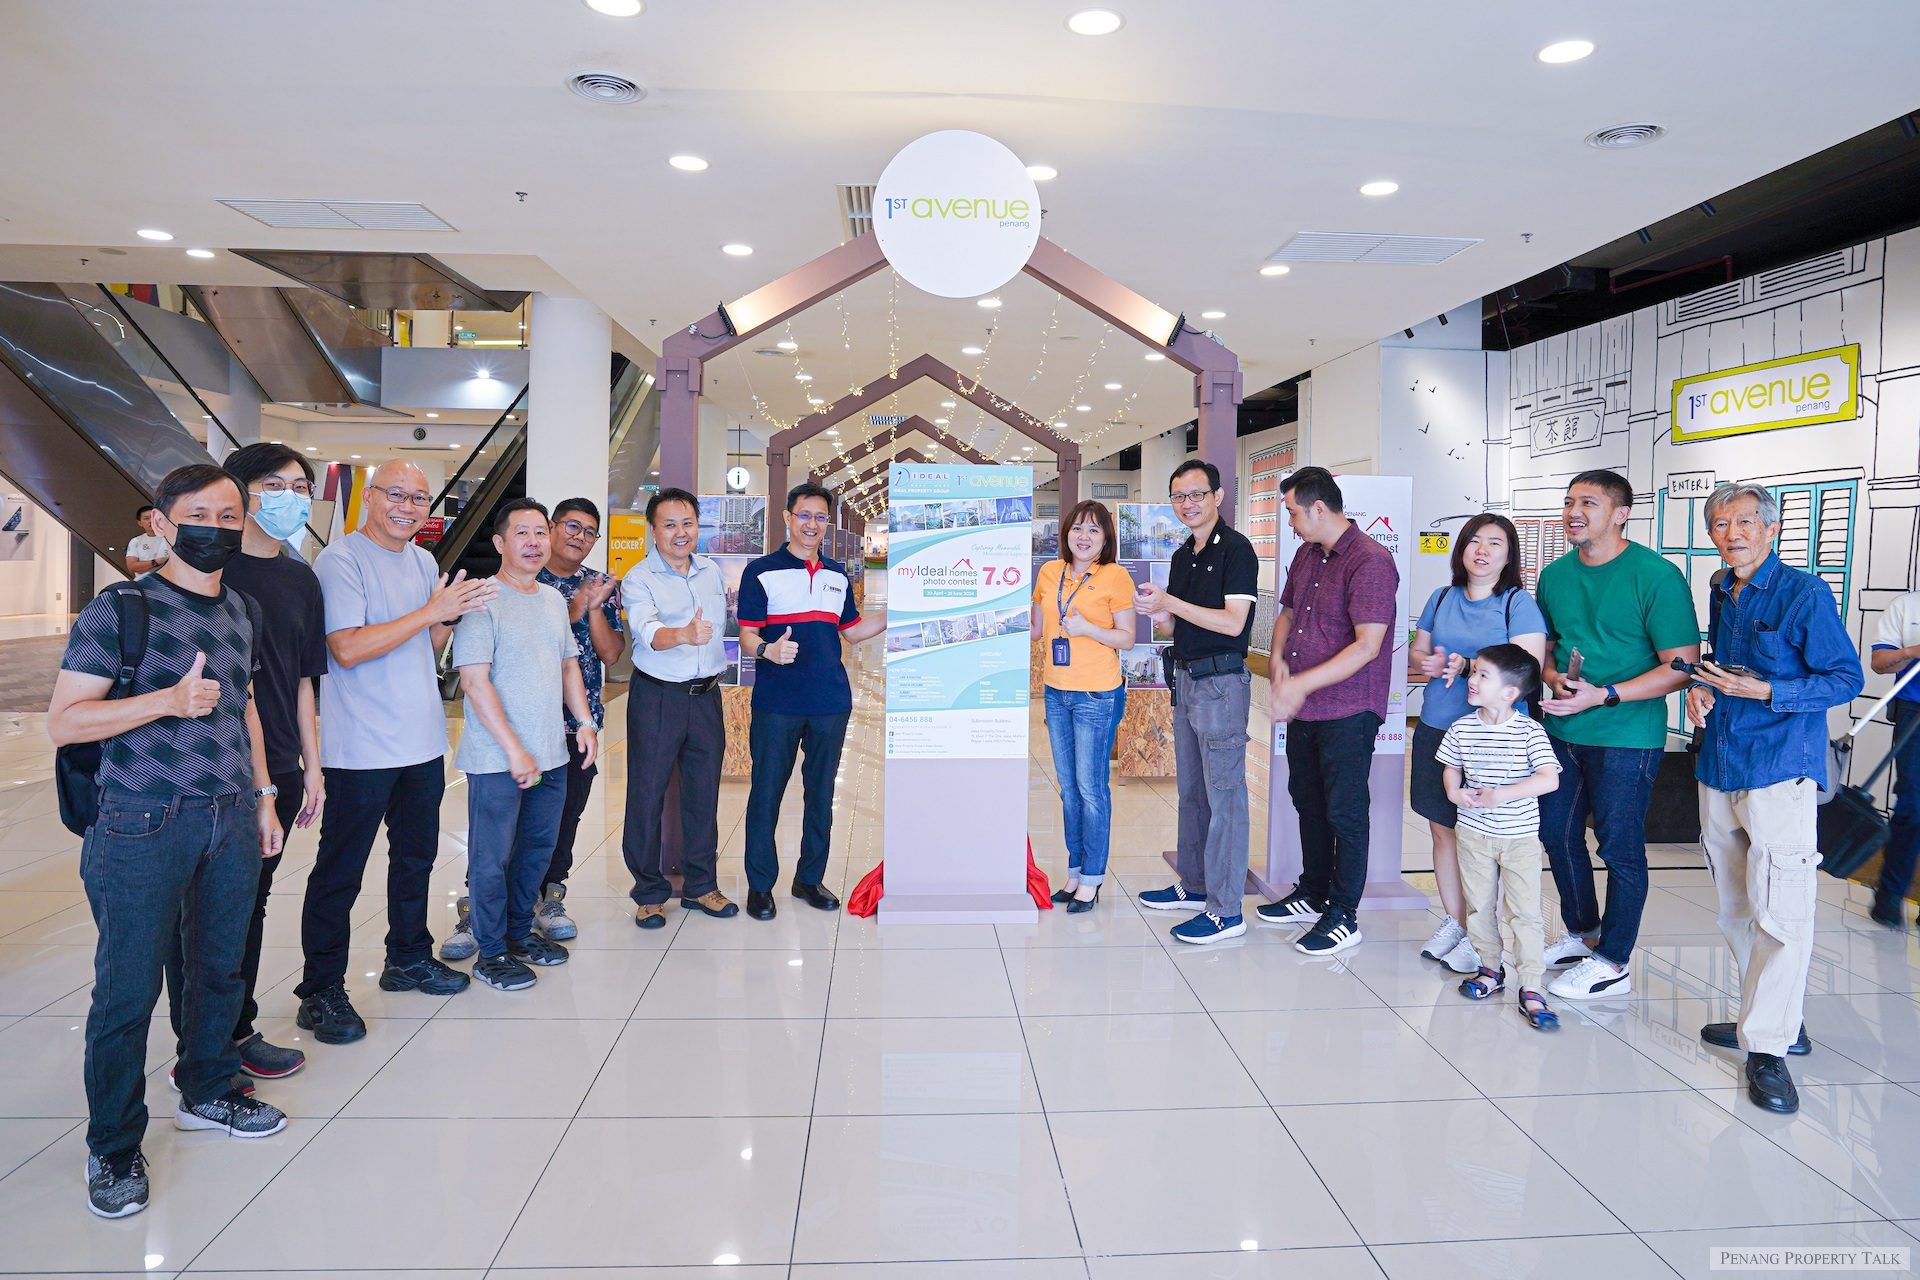 My Ideal Home Photo Contest Winners Exhibition opens at 1st Avenue Penang